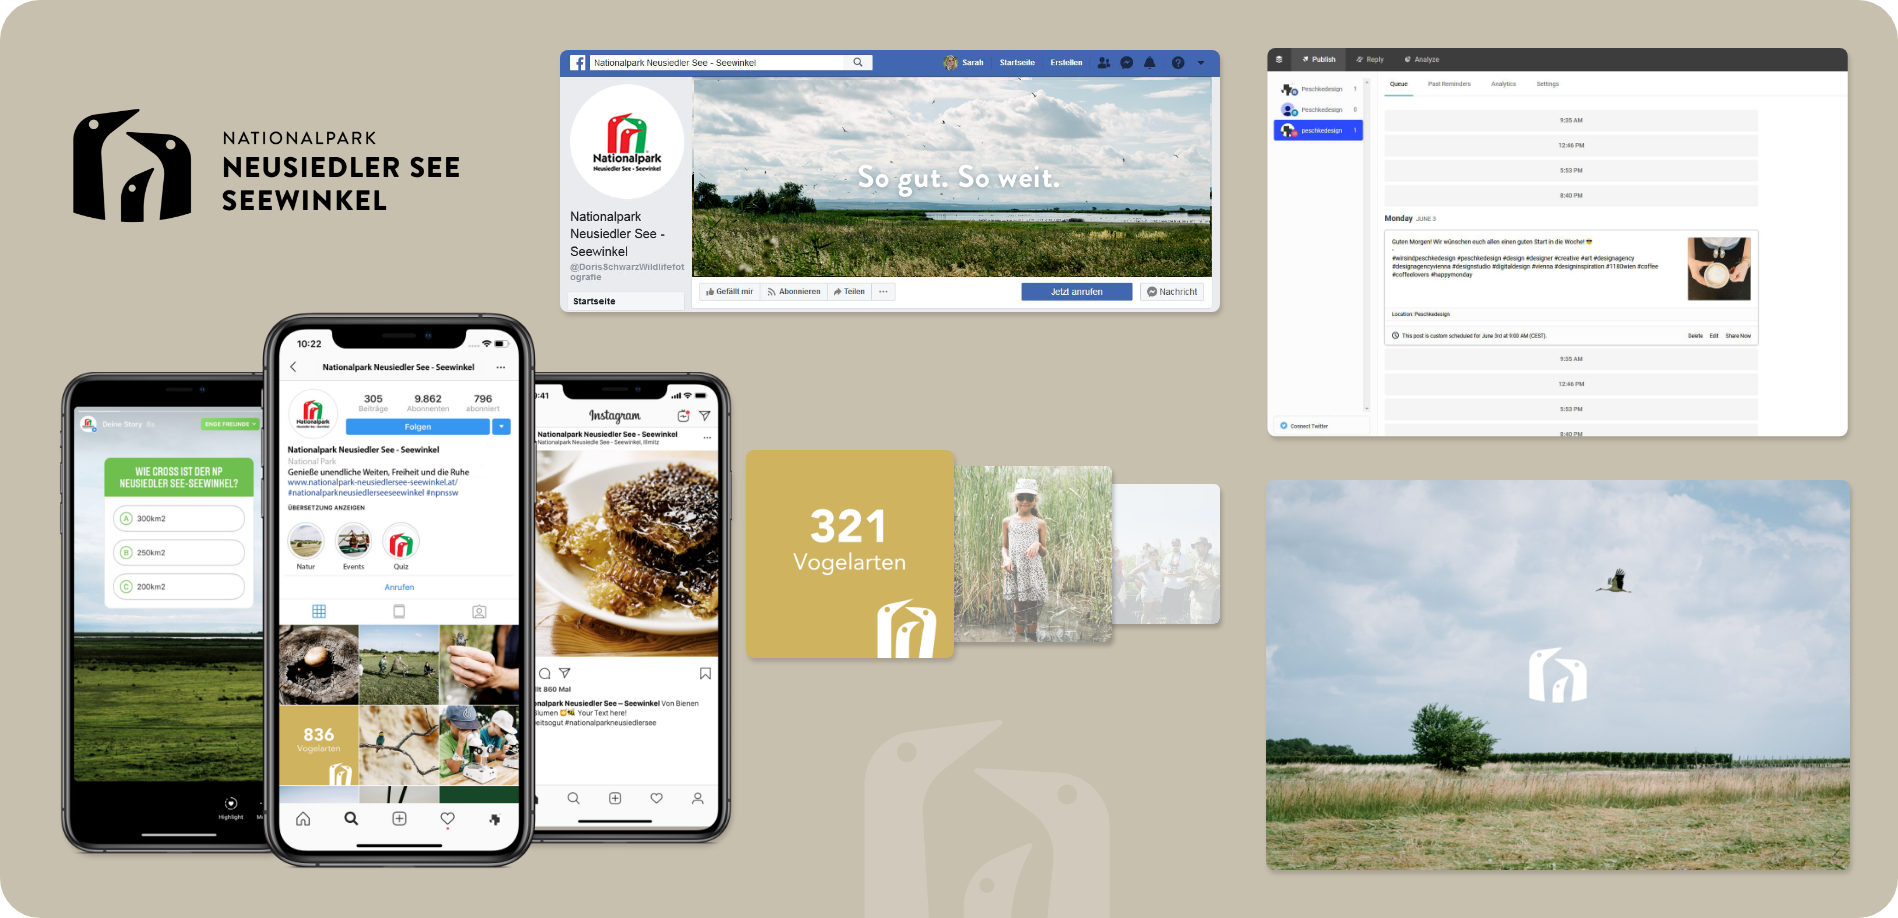 overview of assets of the communications campaign for national park neusiedler see seewinkel | marketing strategy content creation Vienna